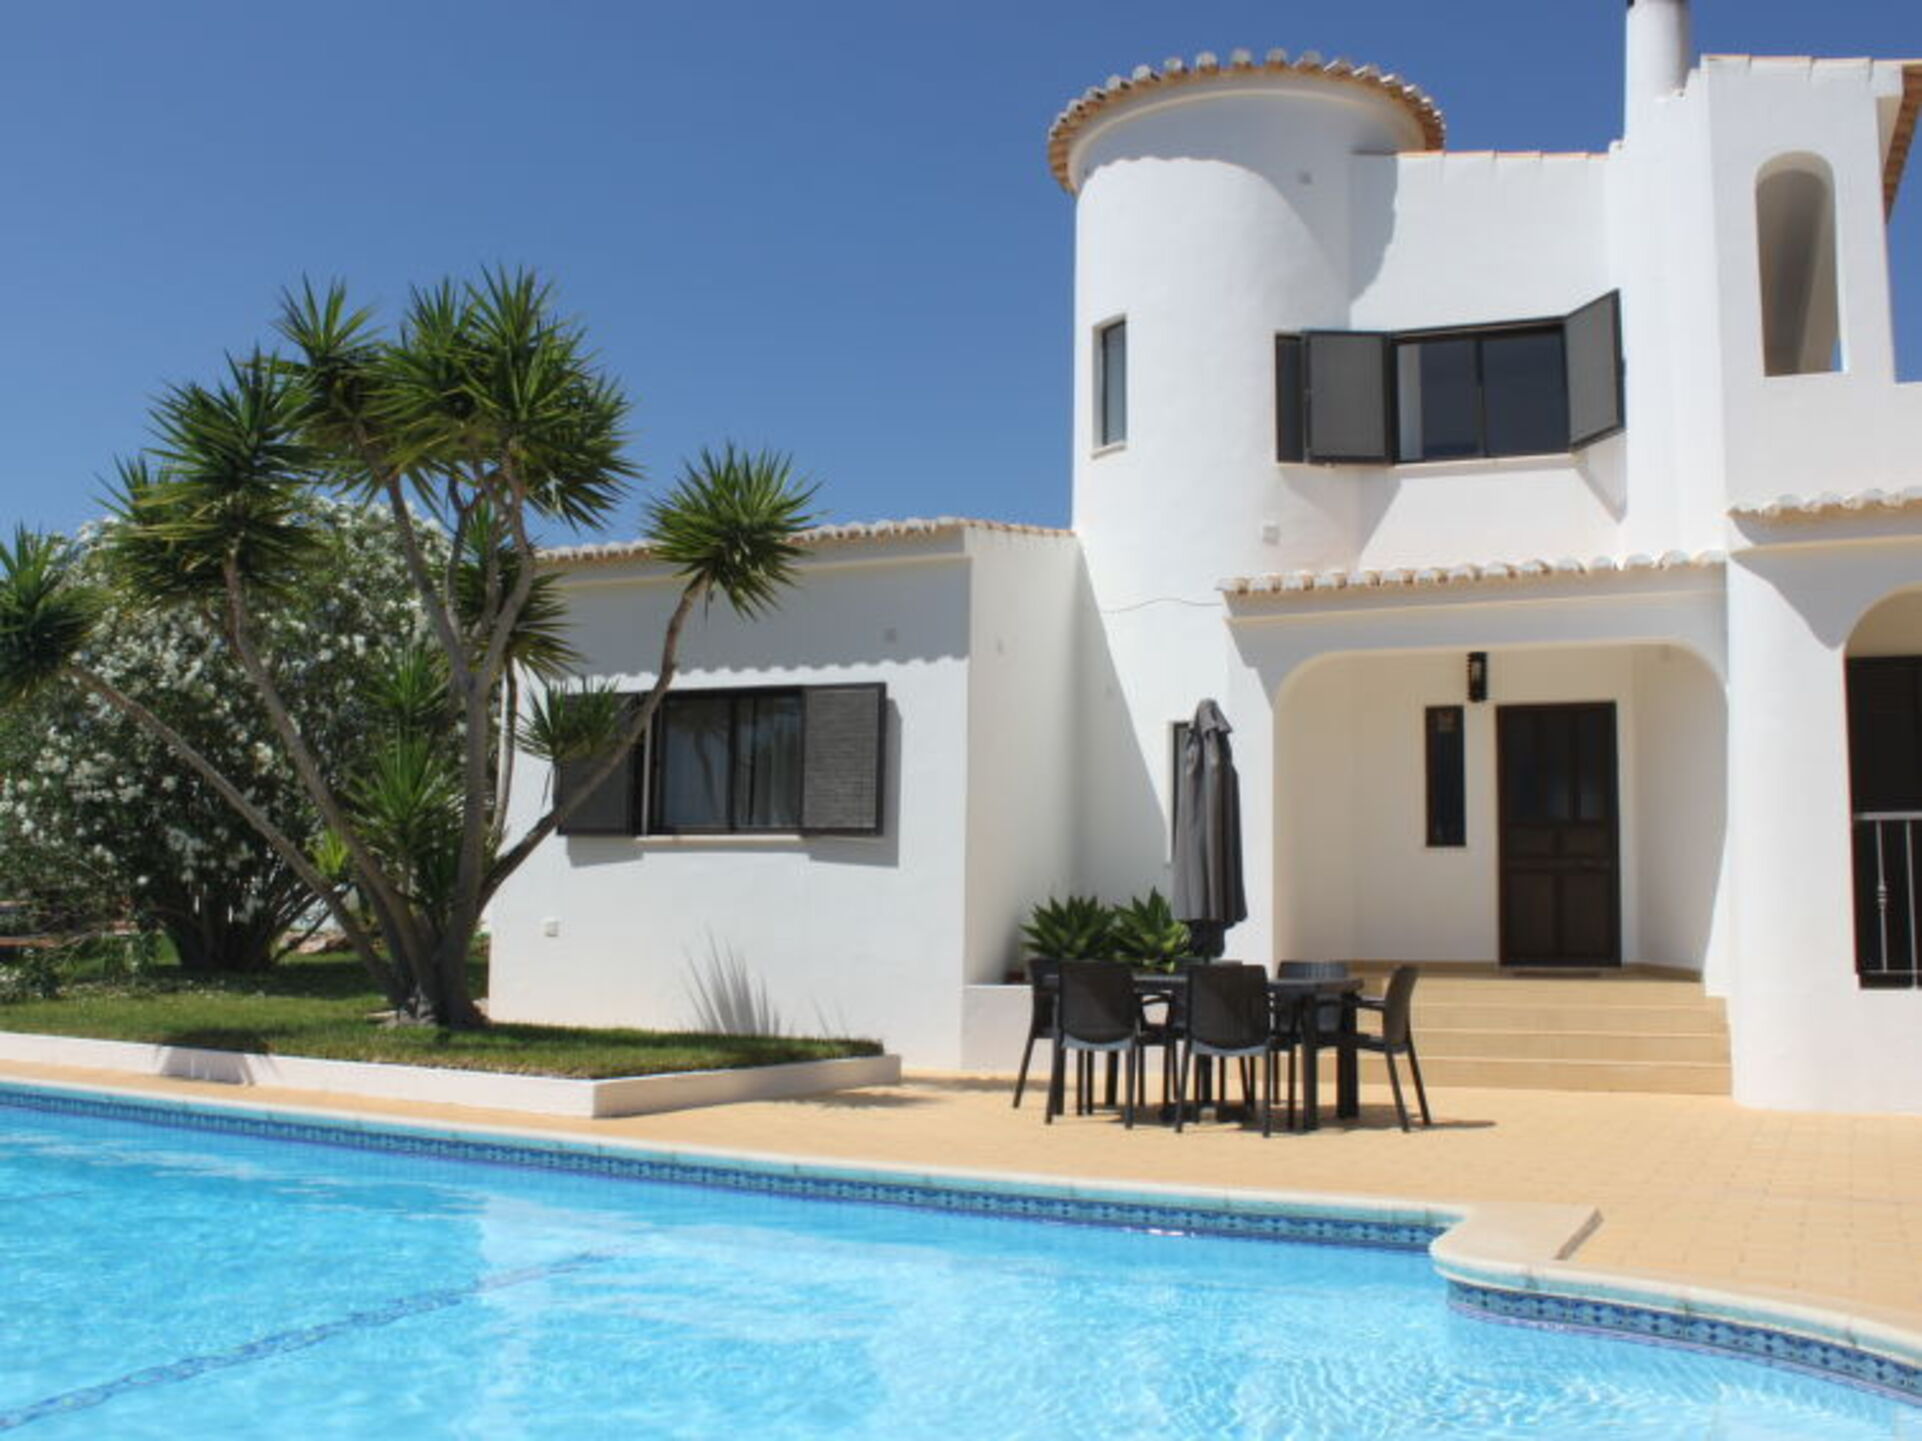 Property Image 1 - Property Manager Villa with First Class Amenities, Faro Villa 1113